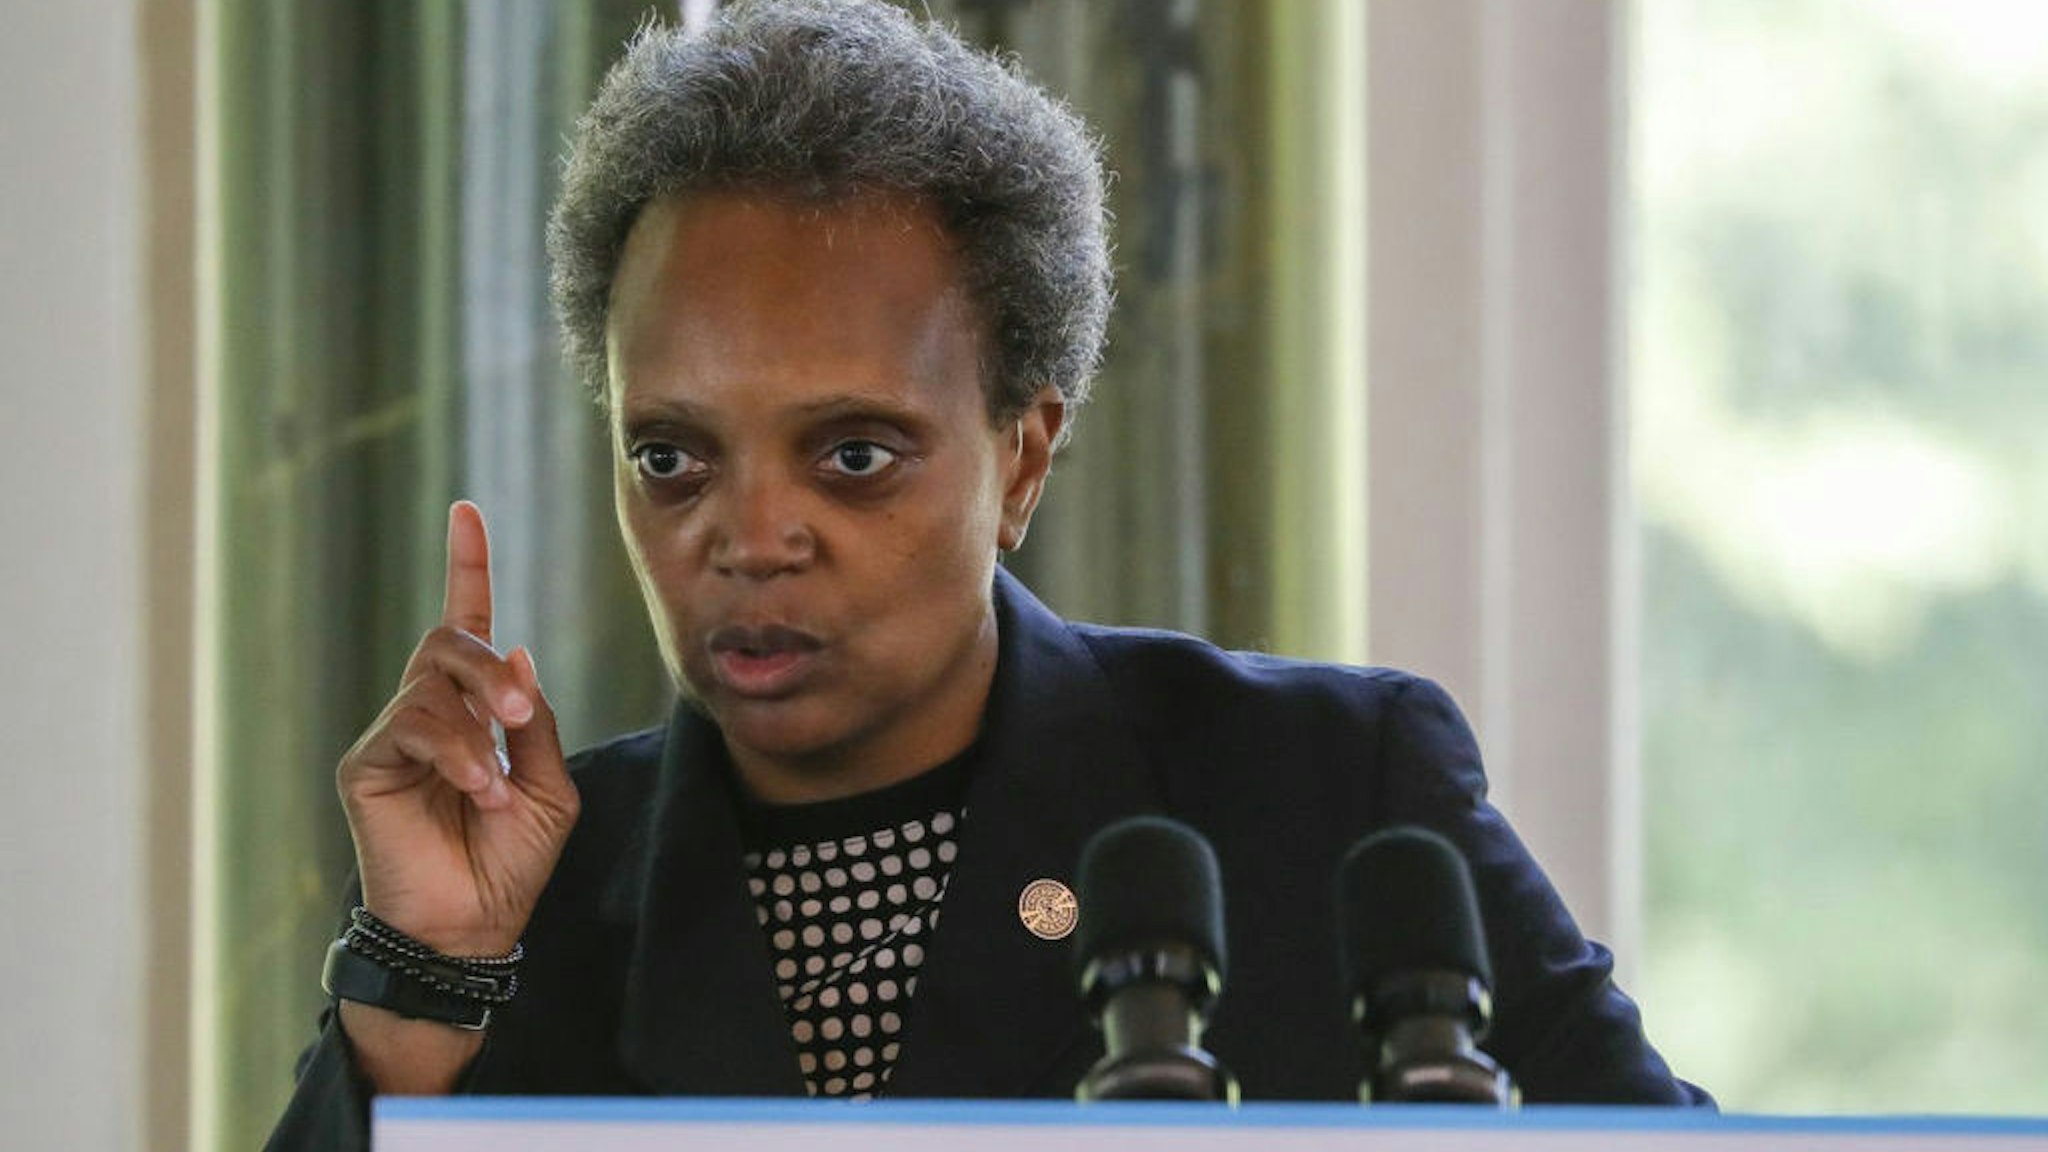 Mayor Lori Lightfoot at South Shore Cultural Center in Chicago on July 9, 2020. (Jose M. Osorio/Chicago Tribune/TNS)